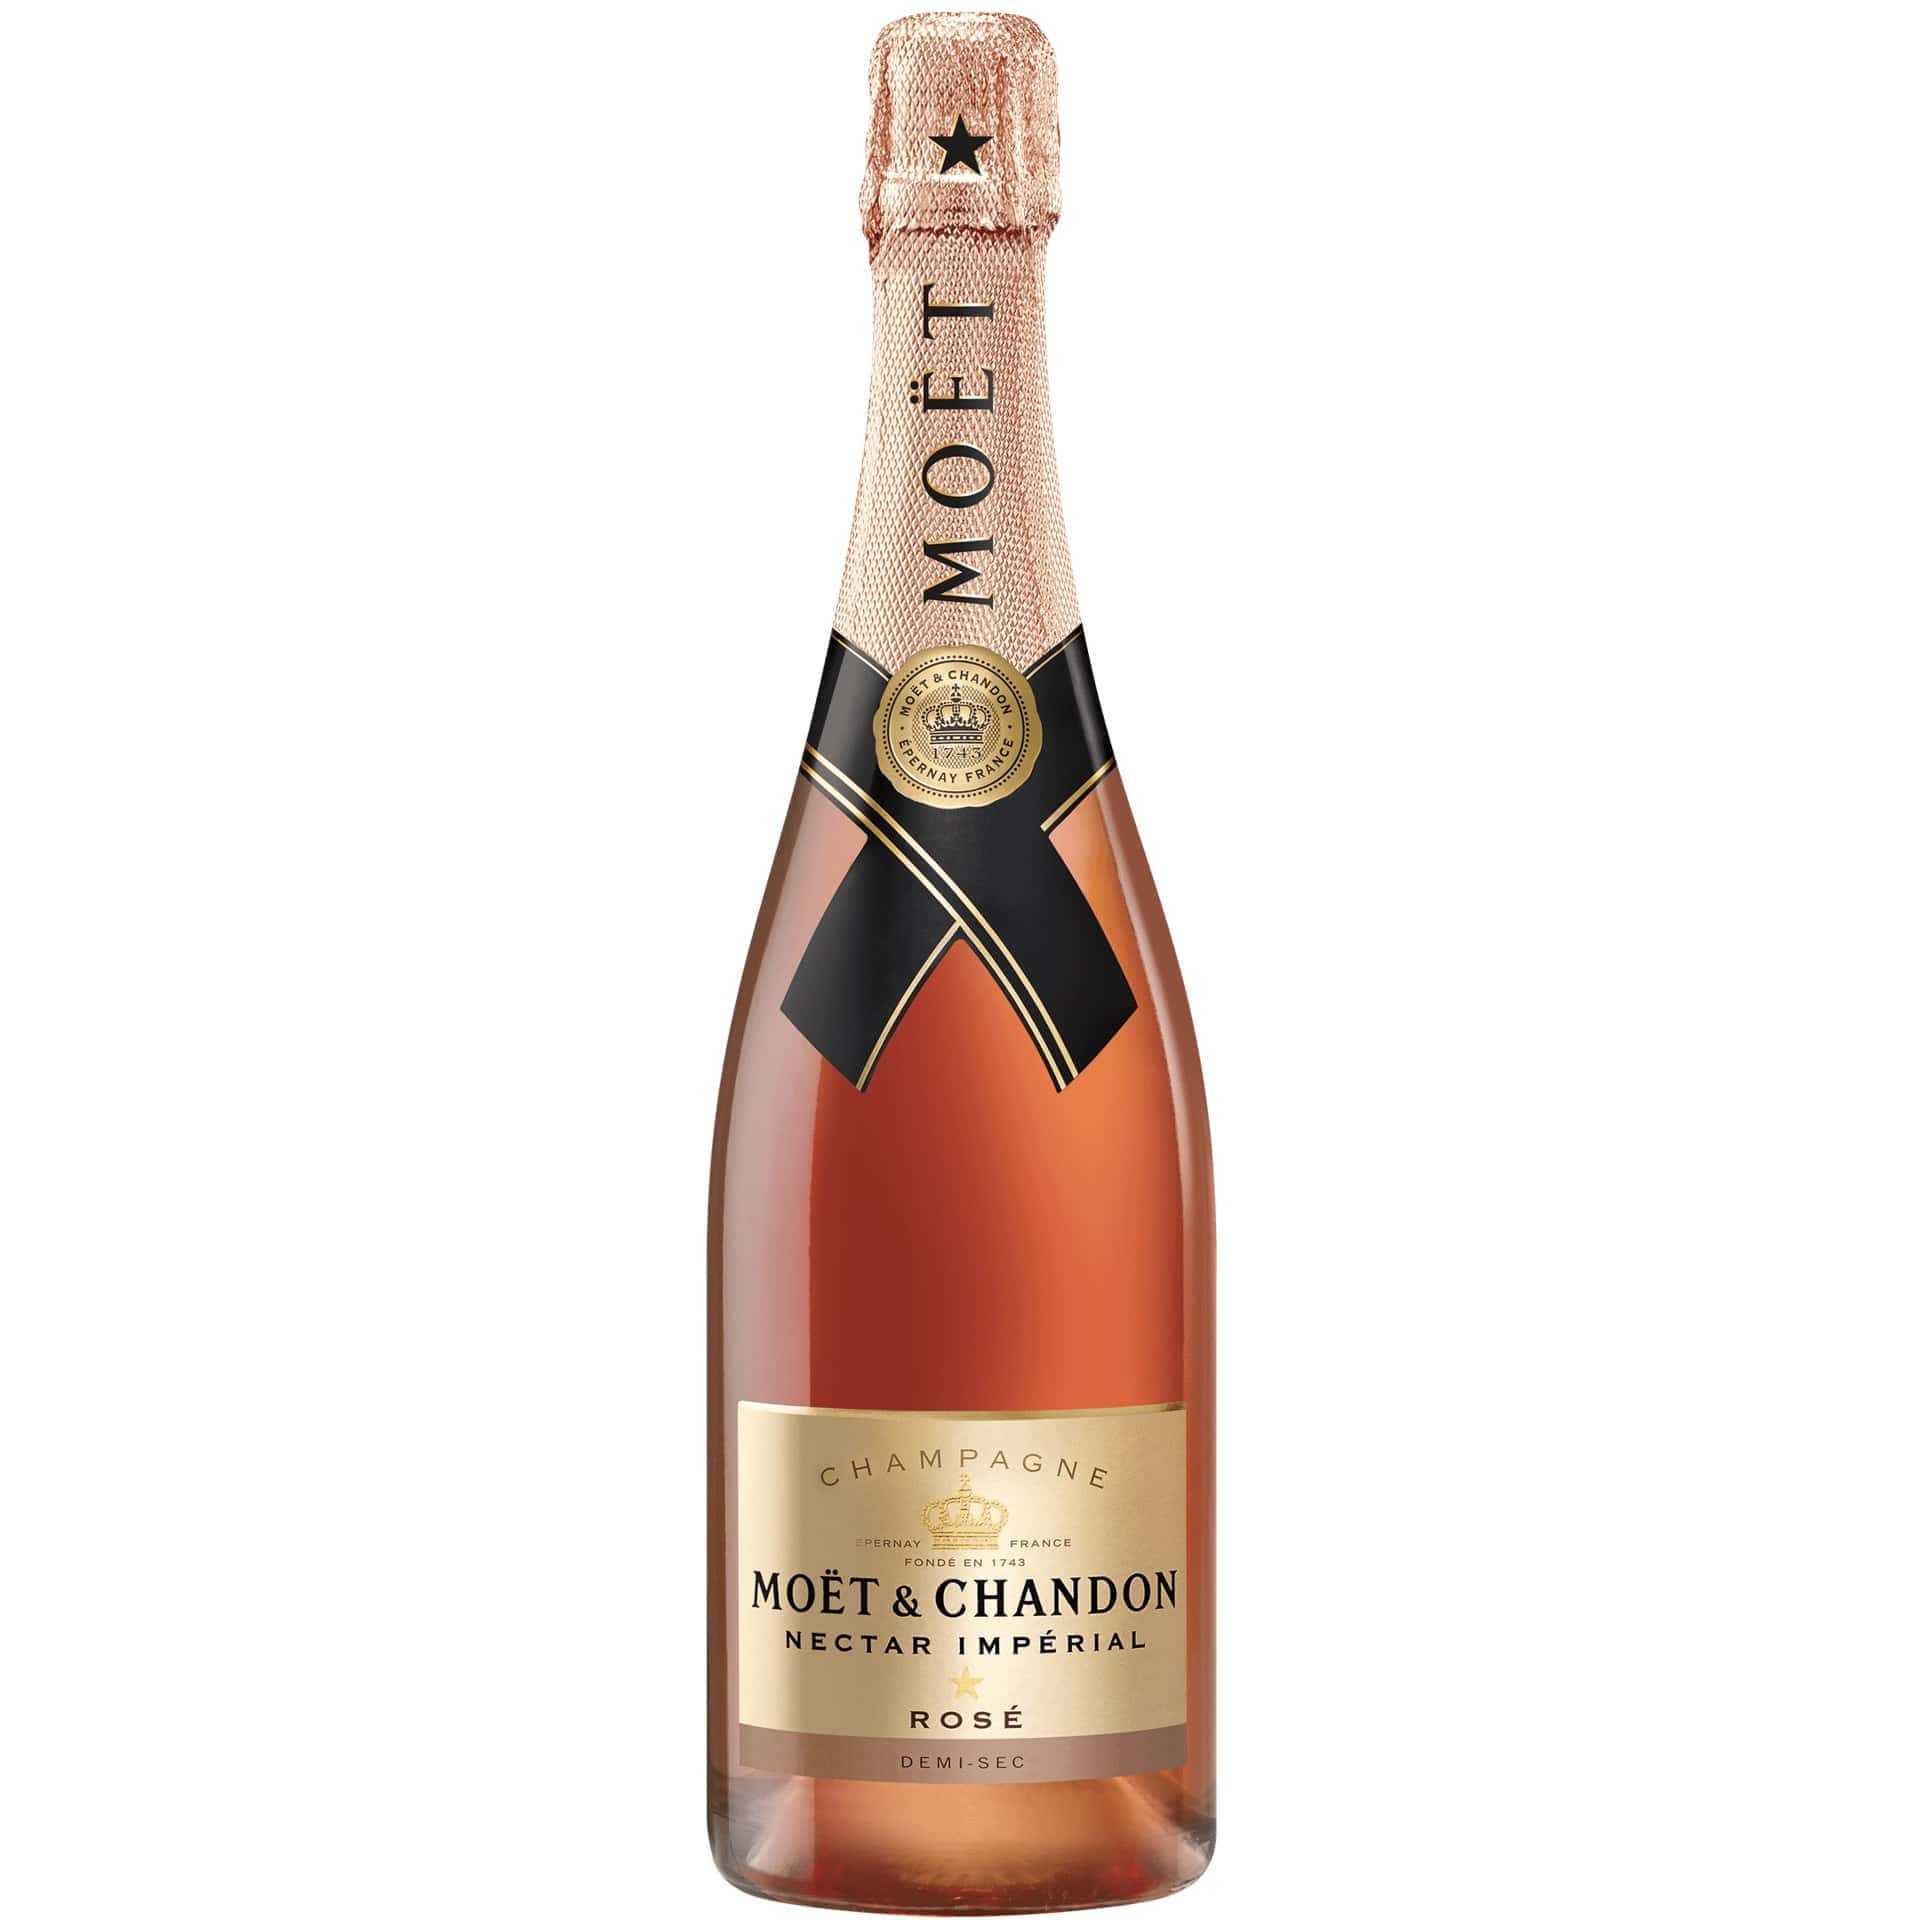 Moët & Chandon Nectar Imperial Rose 75CL - Club Champagne